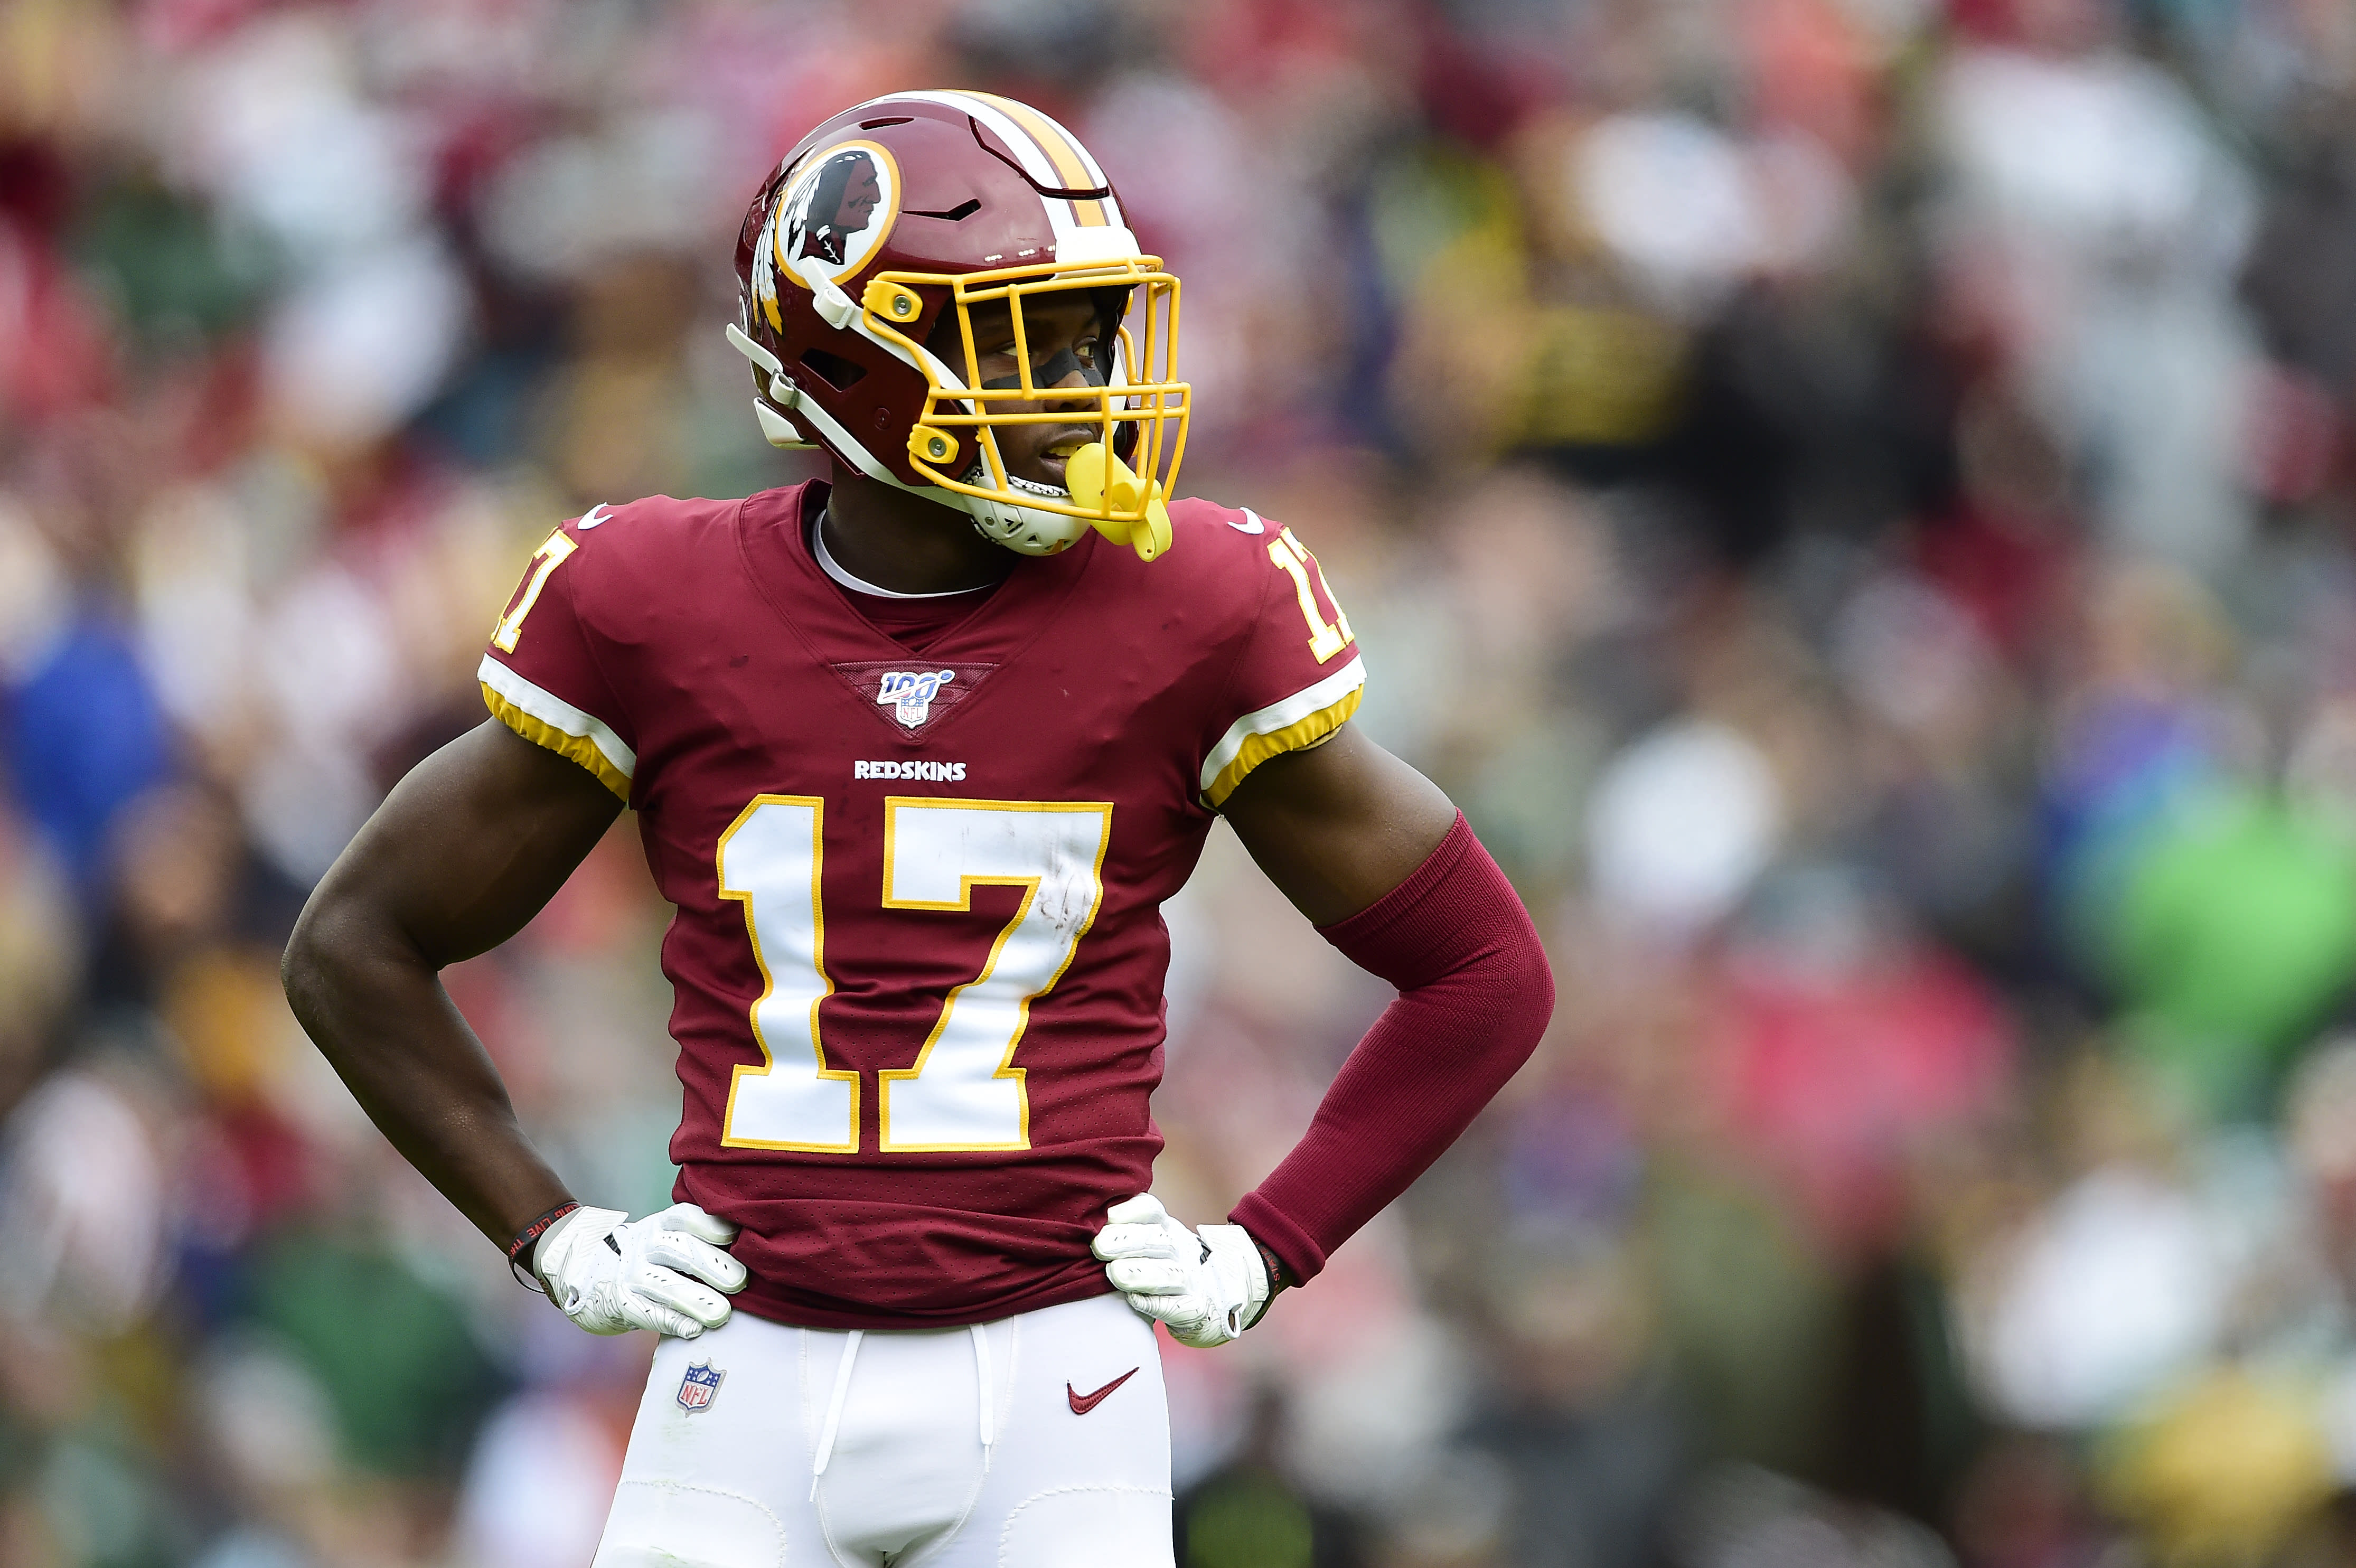 2020 Fantasy Football Draft Tiers for NFL Wide Receivers